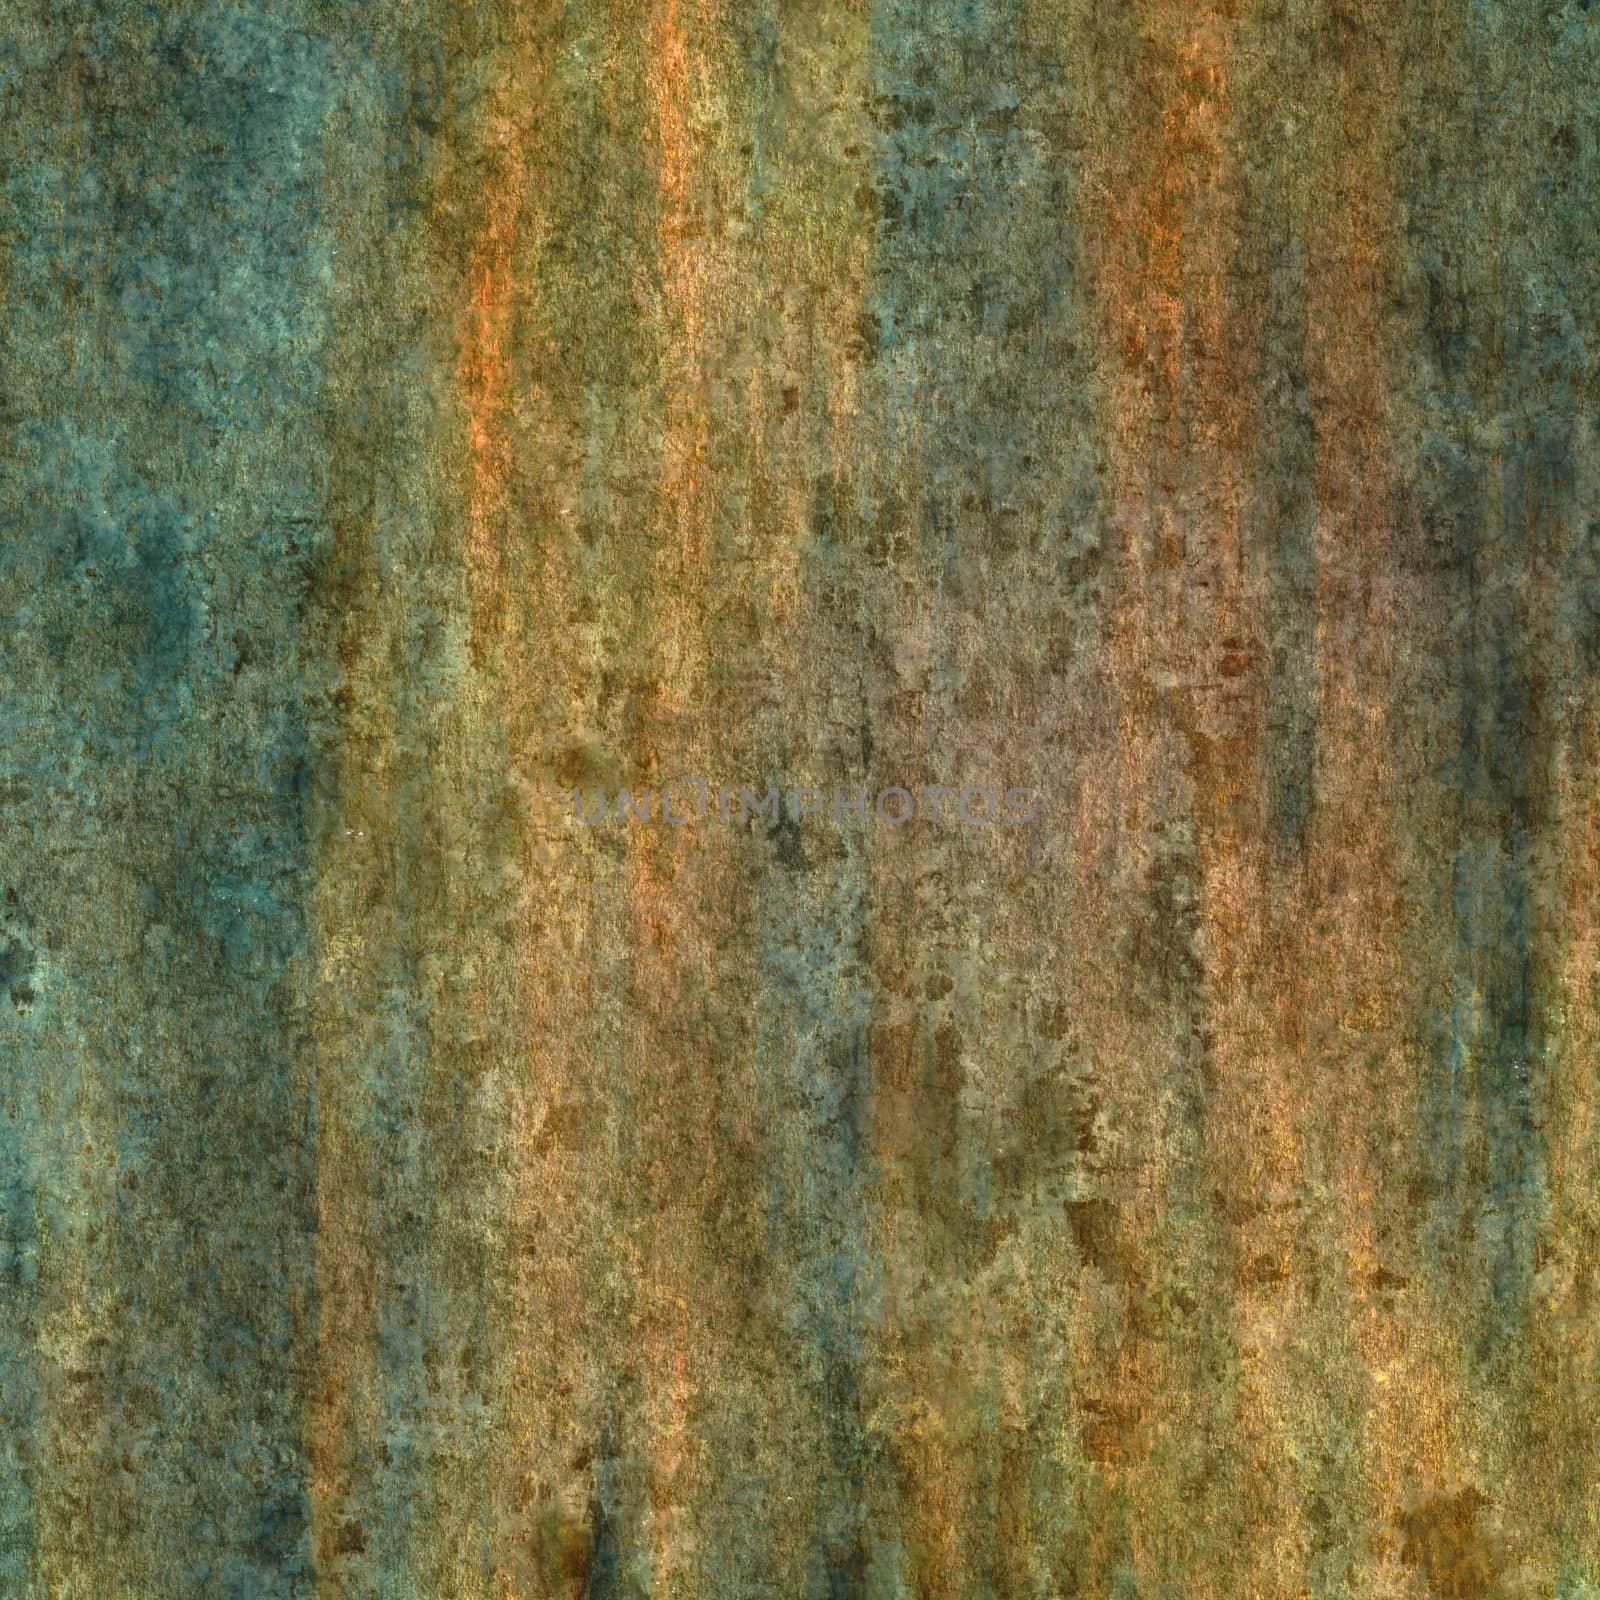 typical rusty surface background by magann